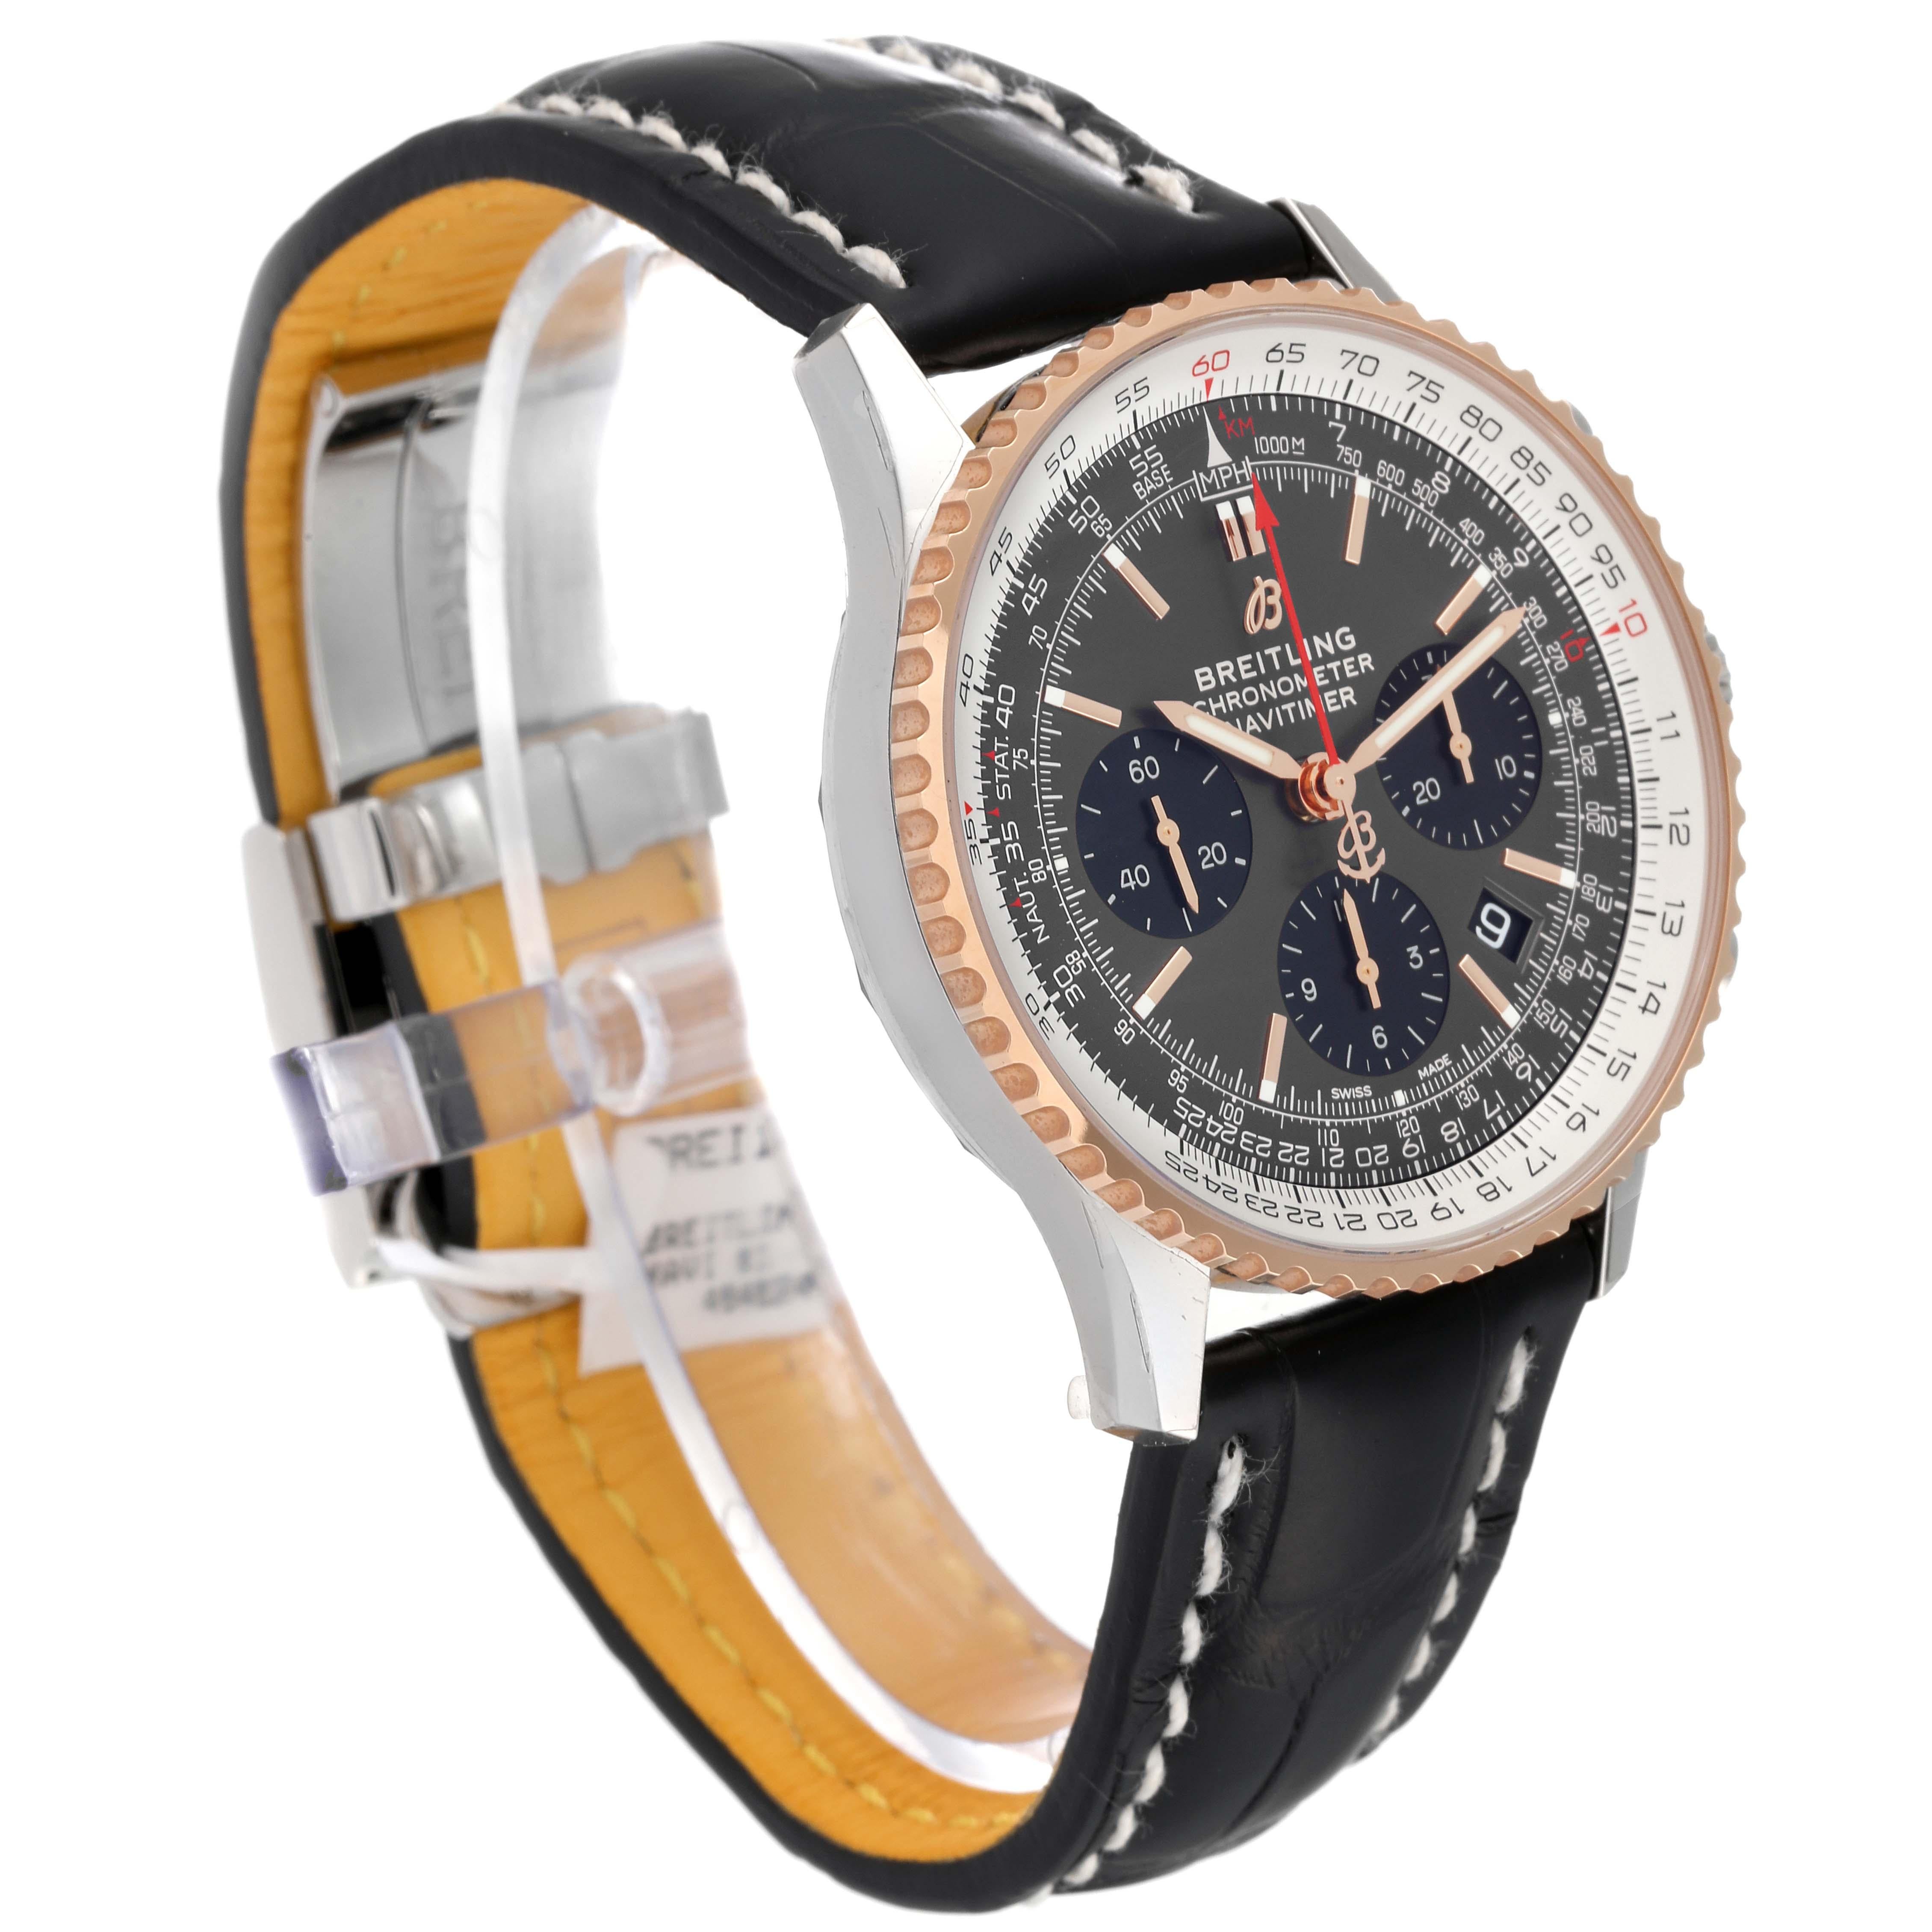 Breitling Navitimer 01 Grey Dial Steel Rose Gold Mens Watch UB0121 Unworn. Self-winding automatic officially certified chronometer movement. Chronograph function. Stainless steel case 42 mm in diameter.  Transparent exhibition sapphire crystal